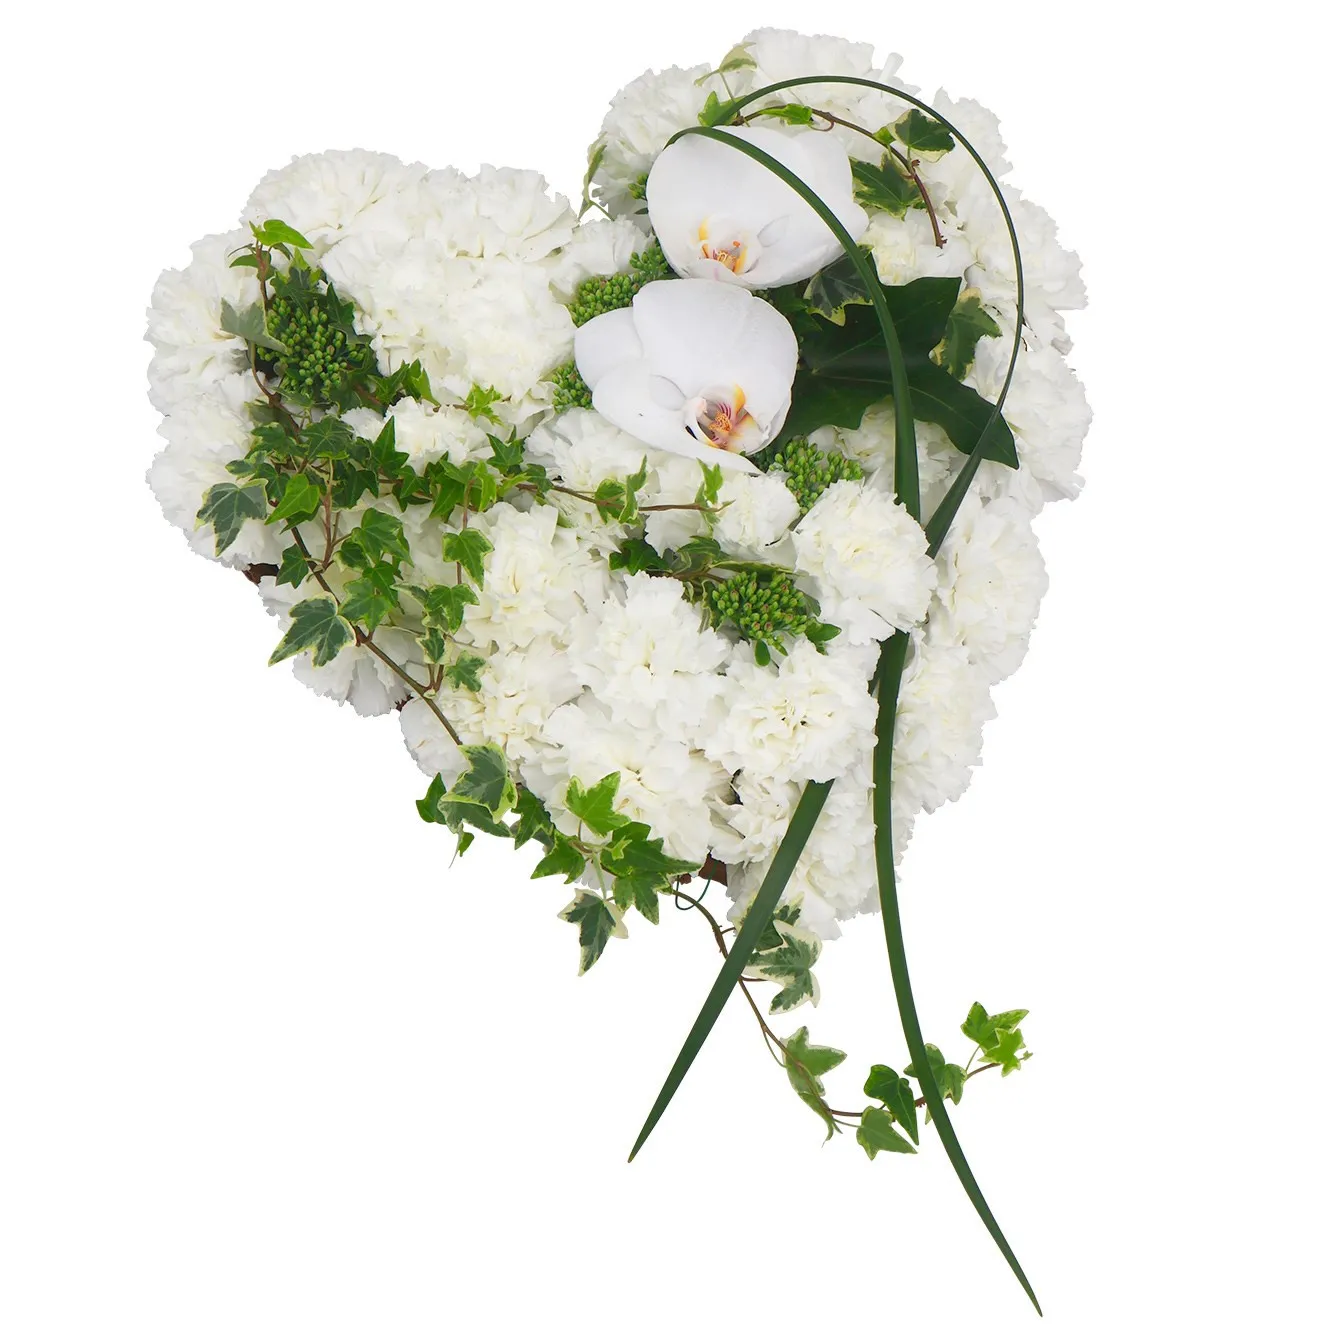 Forever in our hearts - funeral arrangement - Finlandia